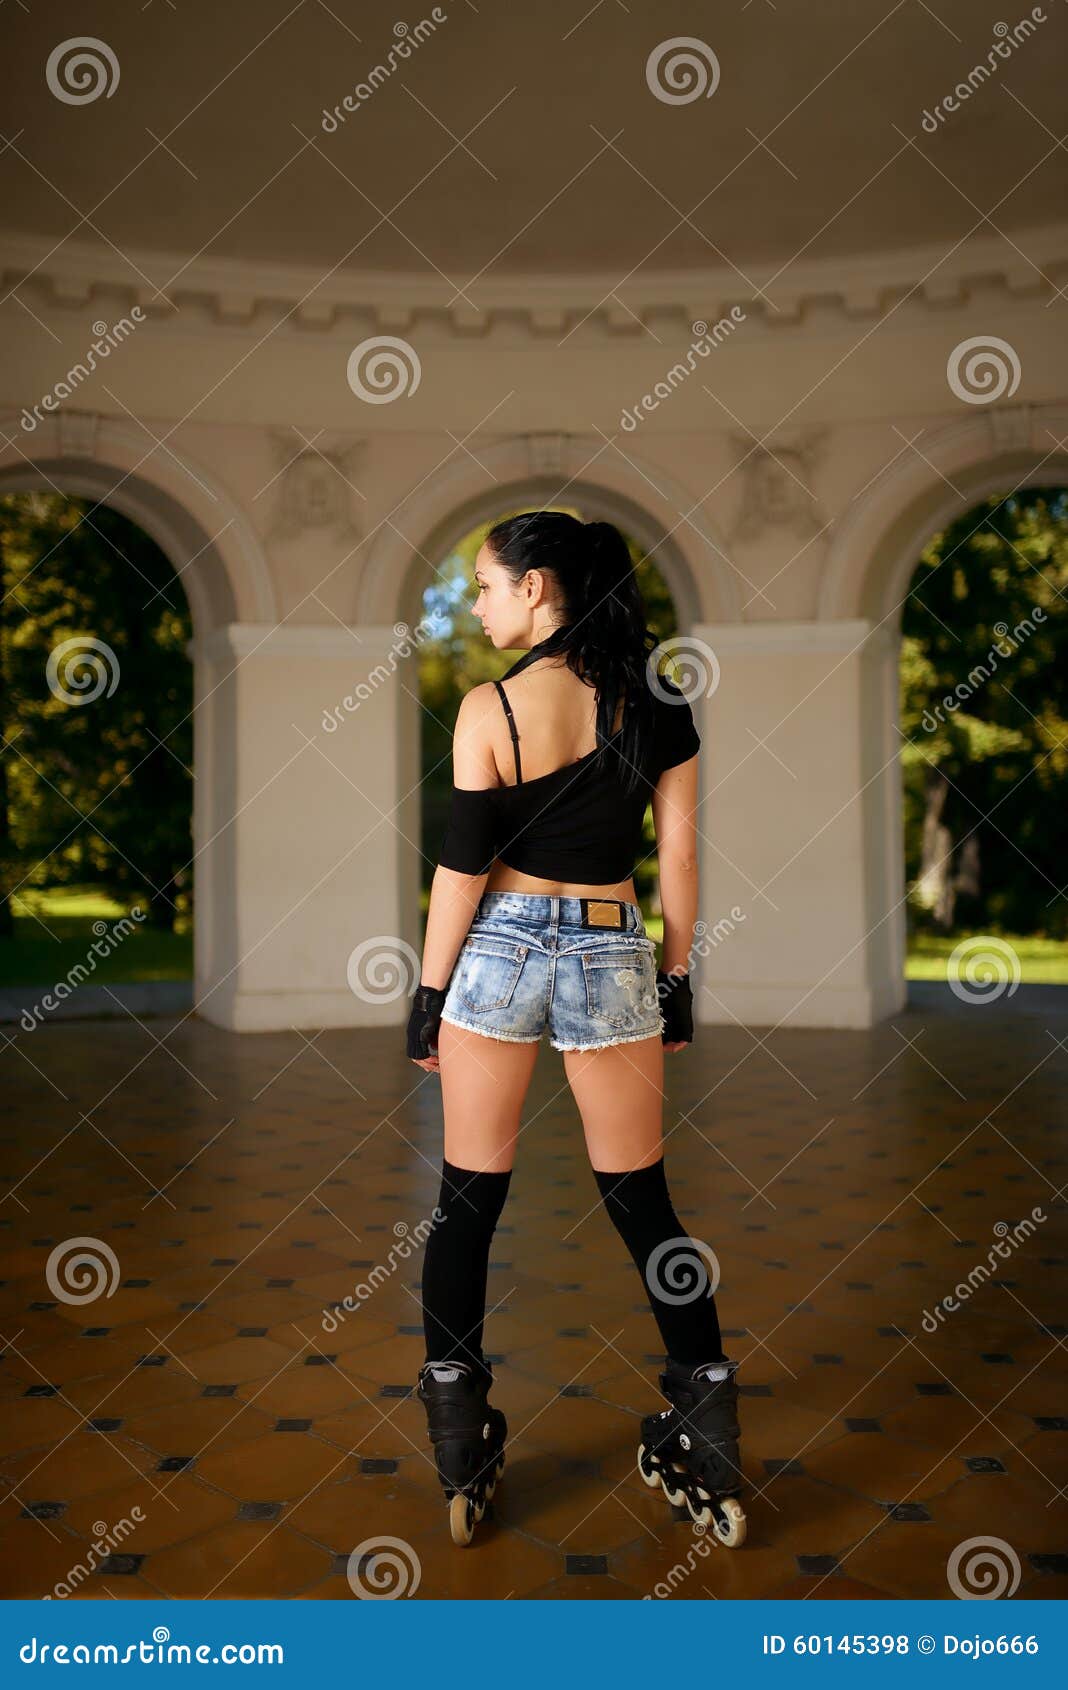 beautiful girl in cut-offs and on roller skates in city park